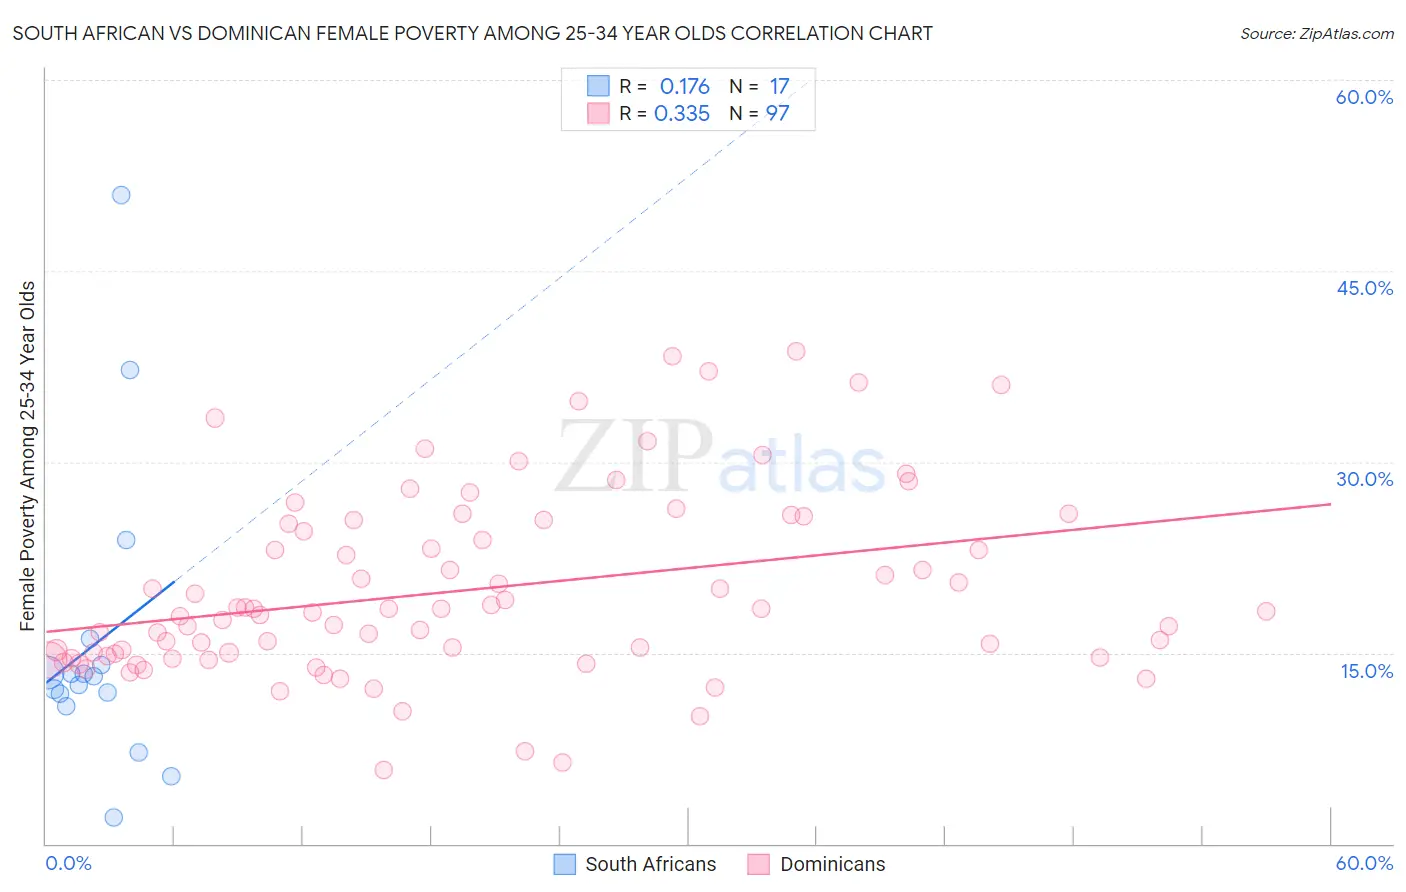 South African vs Dominican Female Poverty Among 25-34 Year Olds